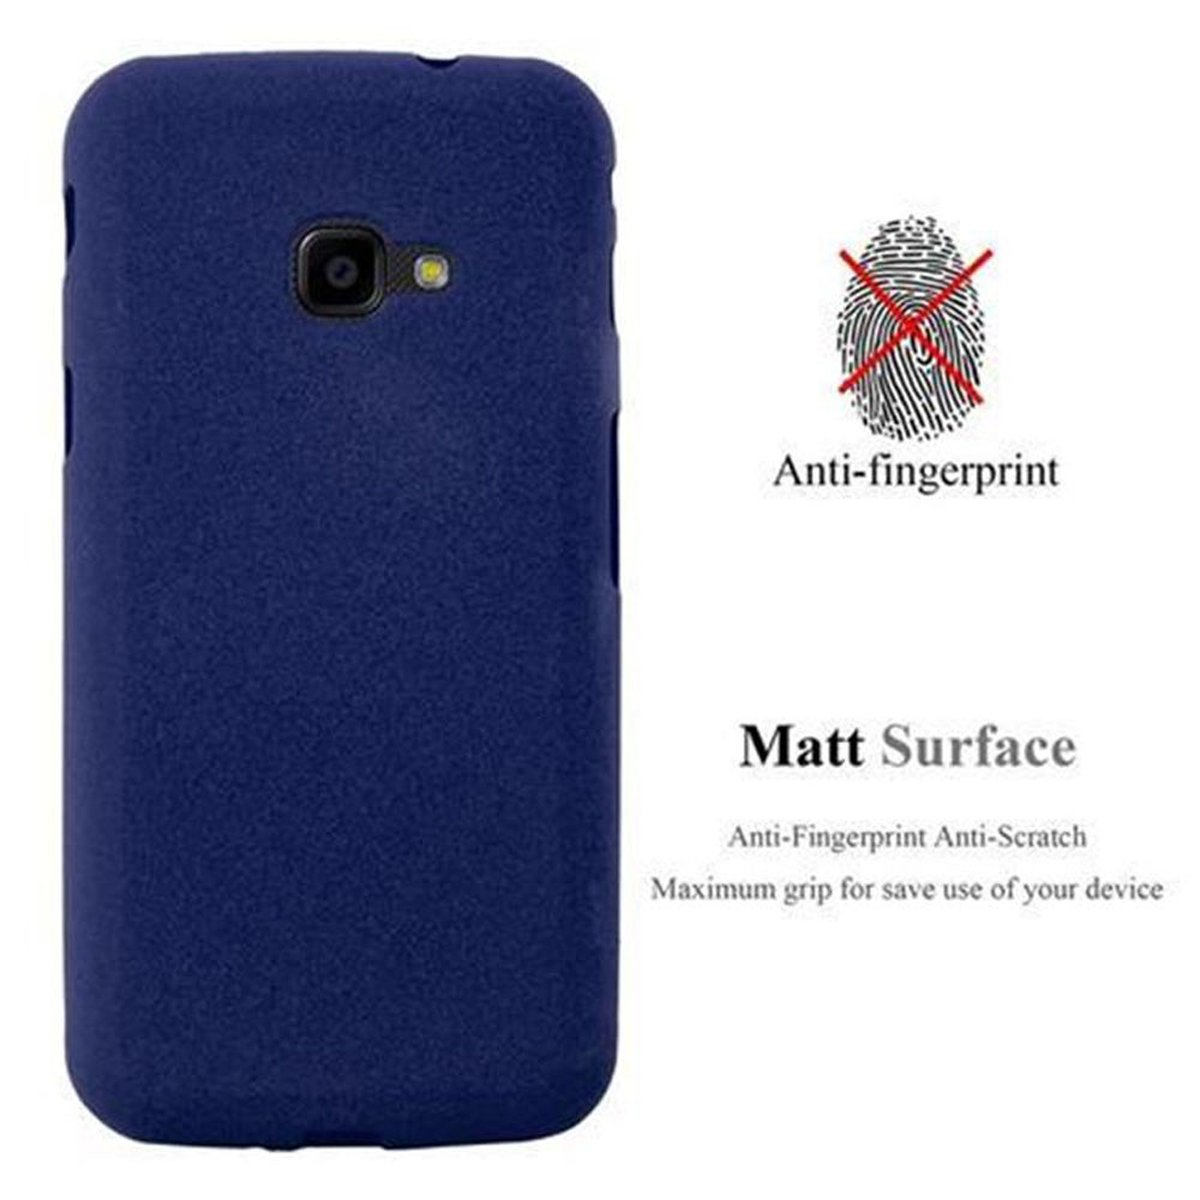 DUNKEL CADORABO XCover FROST XCover Galaxy 4s, Frosted / Samsung, 4 Backcover, Schutzhülle, TPU BLAU